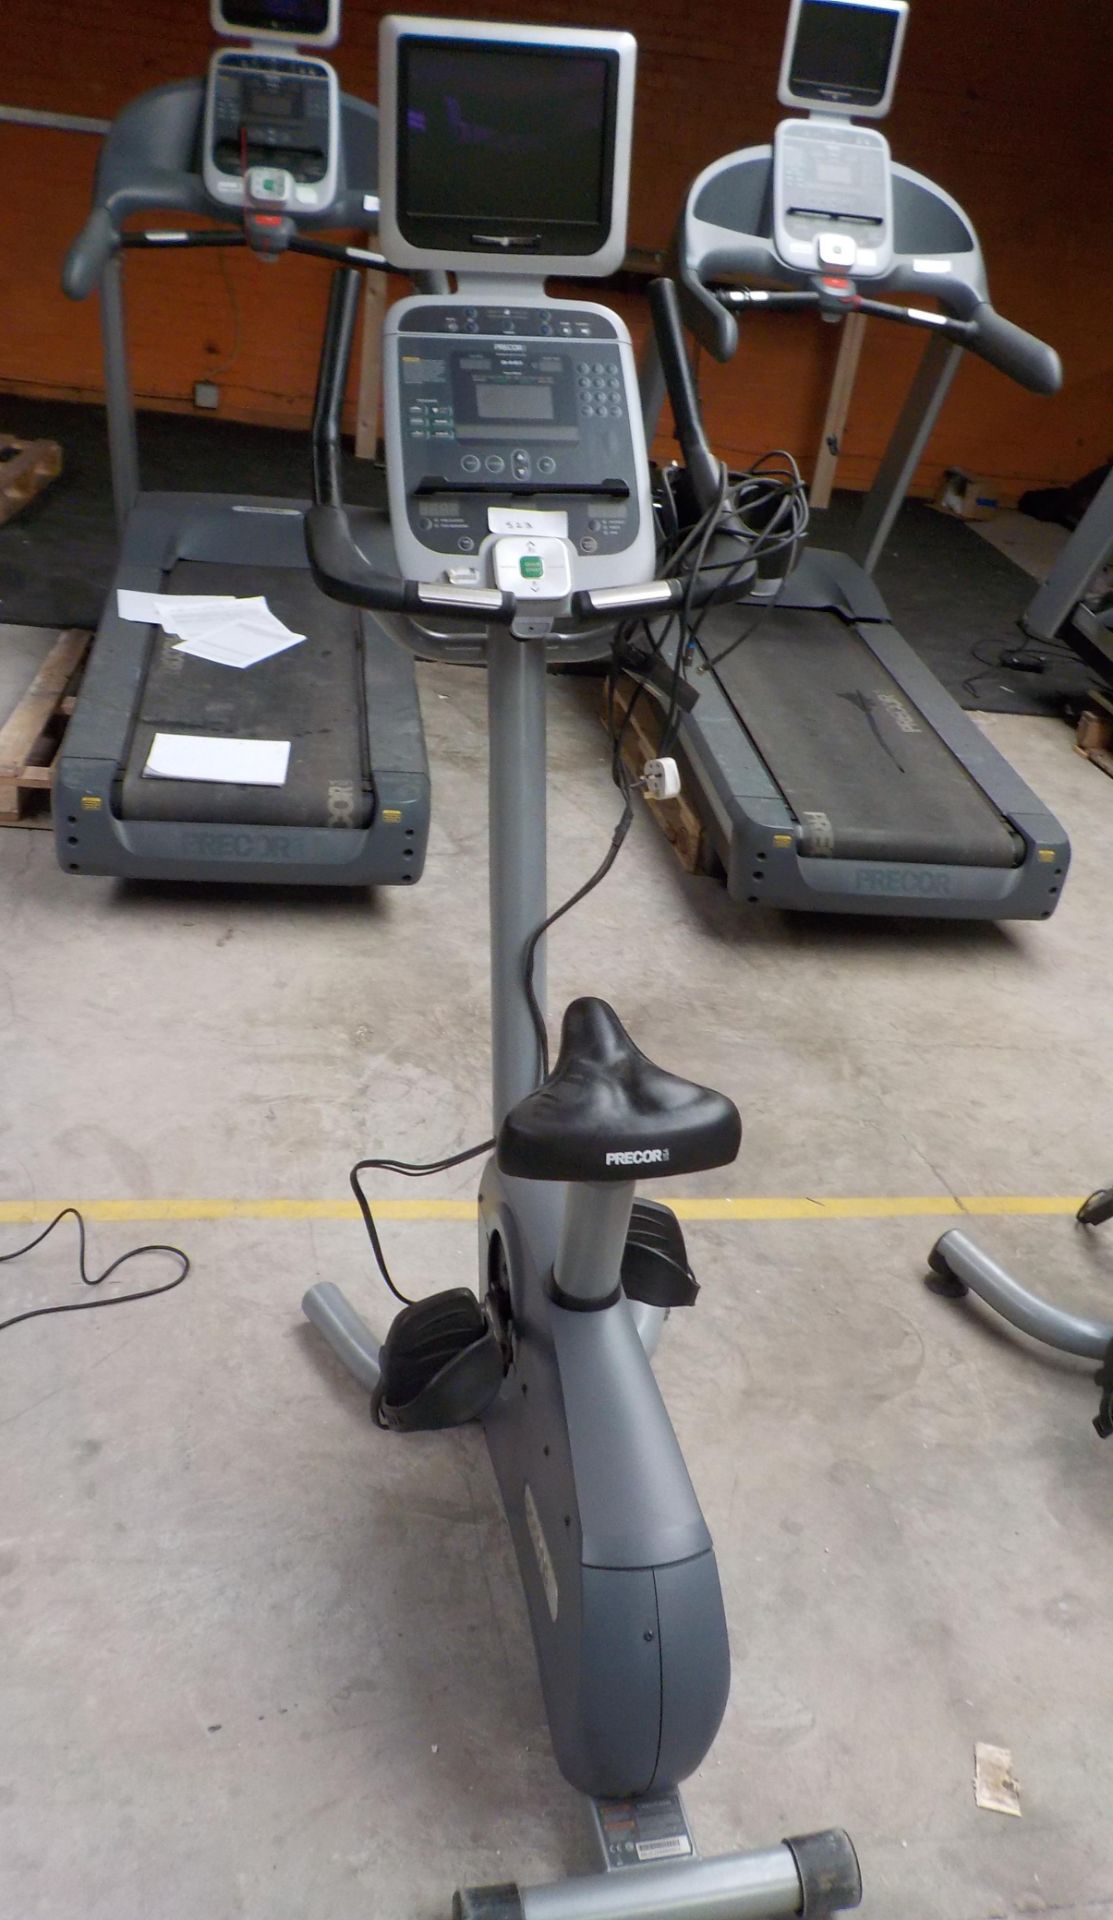 PRECOR UPRIGHT CYCLE - C842i (WITH TV) serial number AGJZJ20090003 (seat pin missing) *PLEASE NOTE